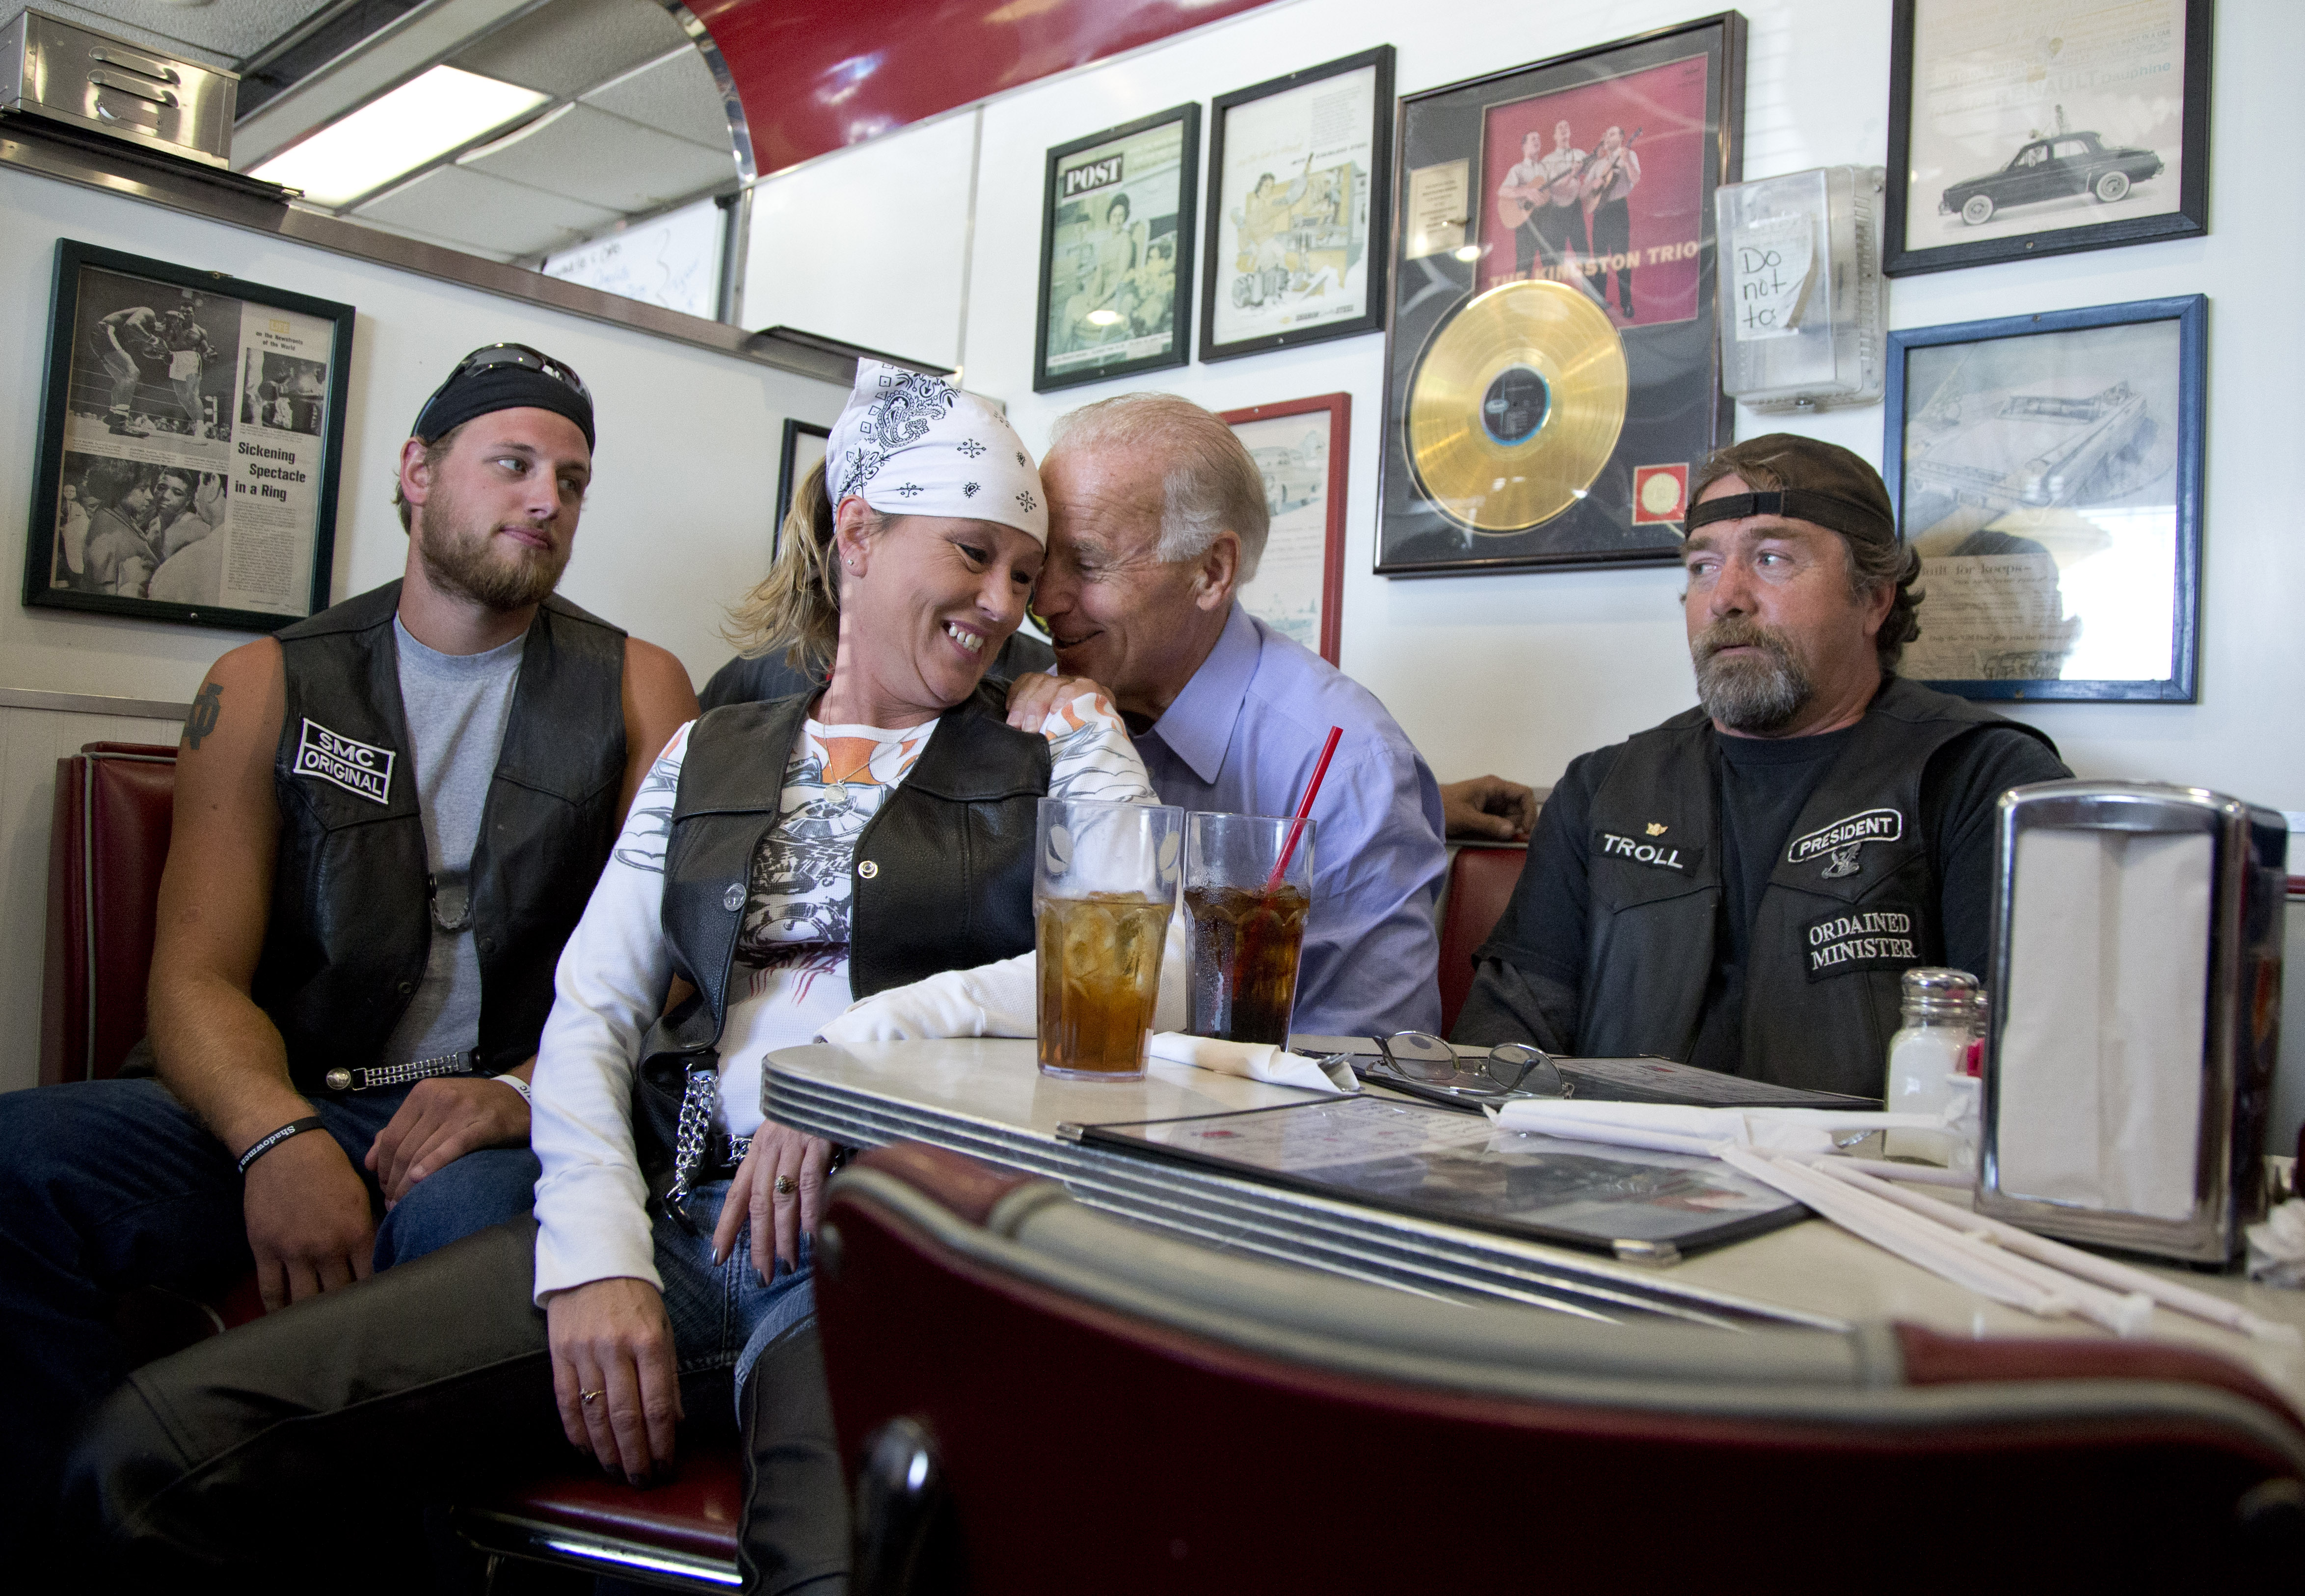 Vice President Joe Biden's talks to customers during a stop at Cruisers Diner, Sunday, Sept. 9, 2012, in Seaman, Ohio.  (AP Photo/Carolyn Kaster)